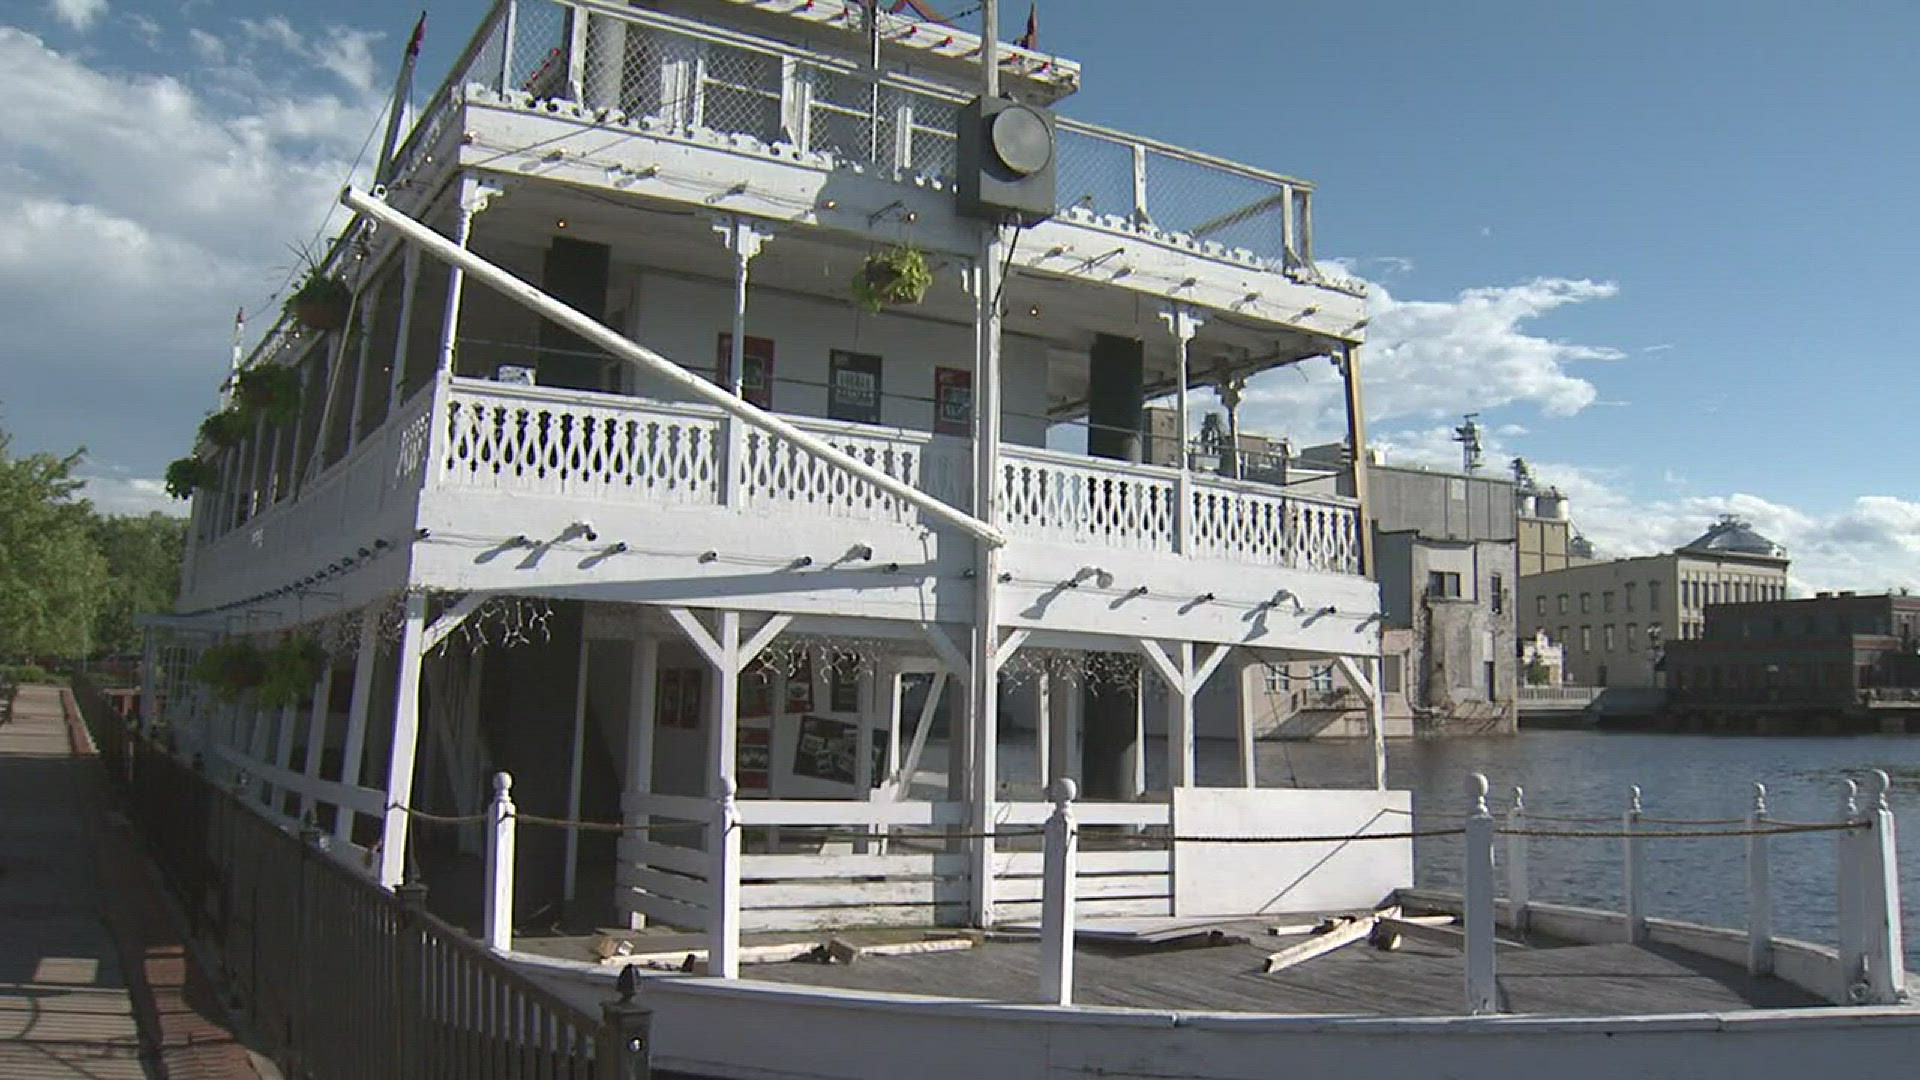 The city of Lowell will move forward with plans to build a new showboat.